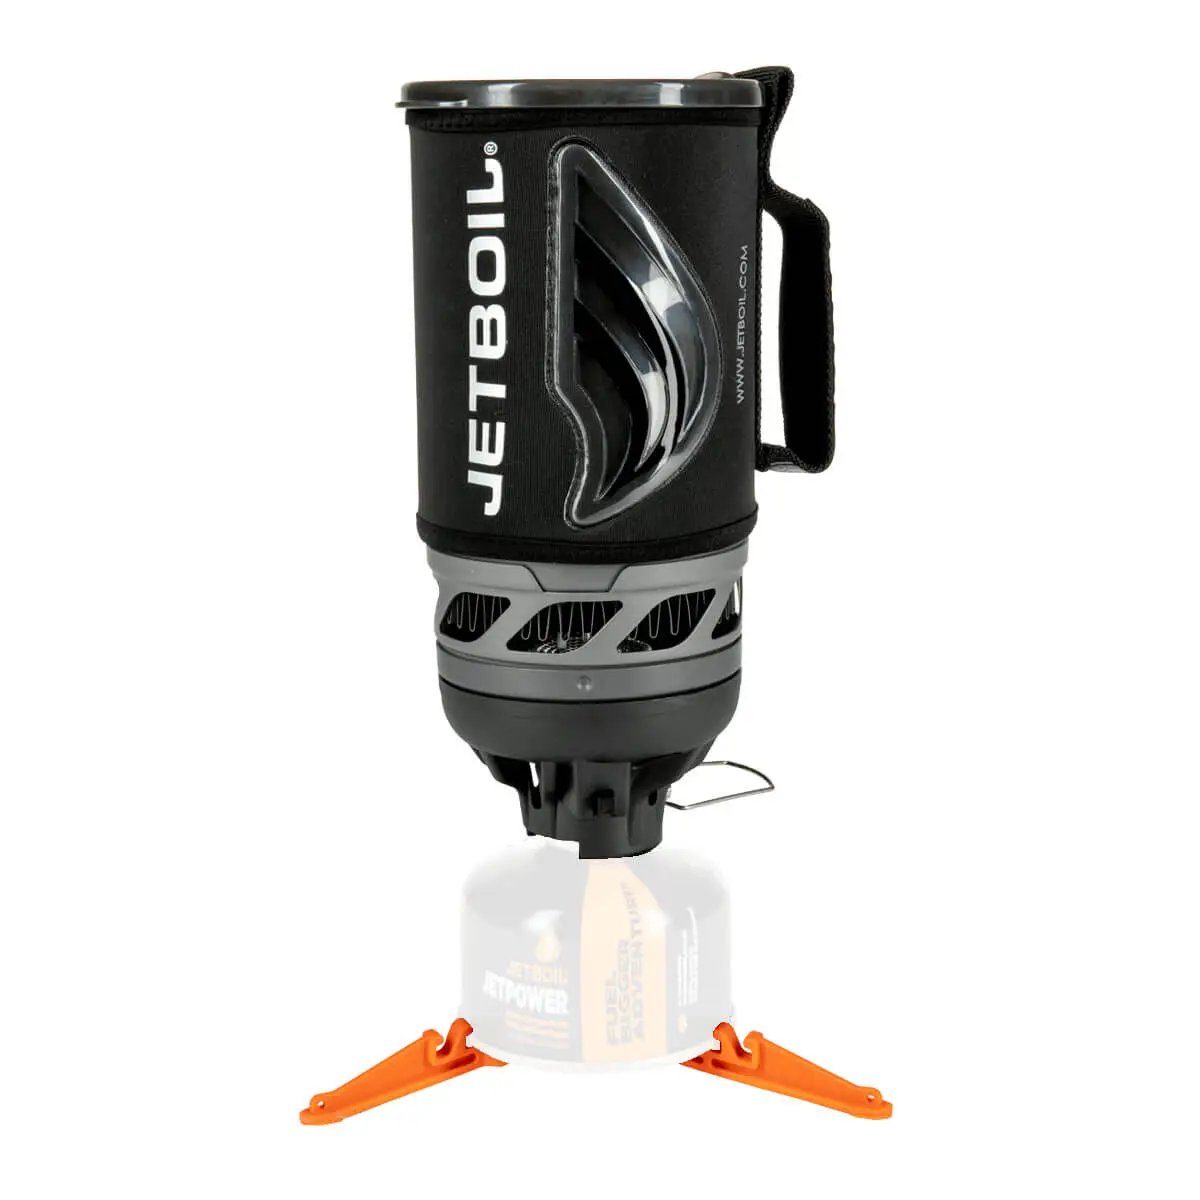 Jetboil Flash Carbon 1L Personal Cooking Stove - John Bull Clothing